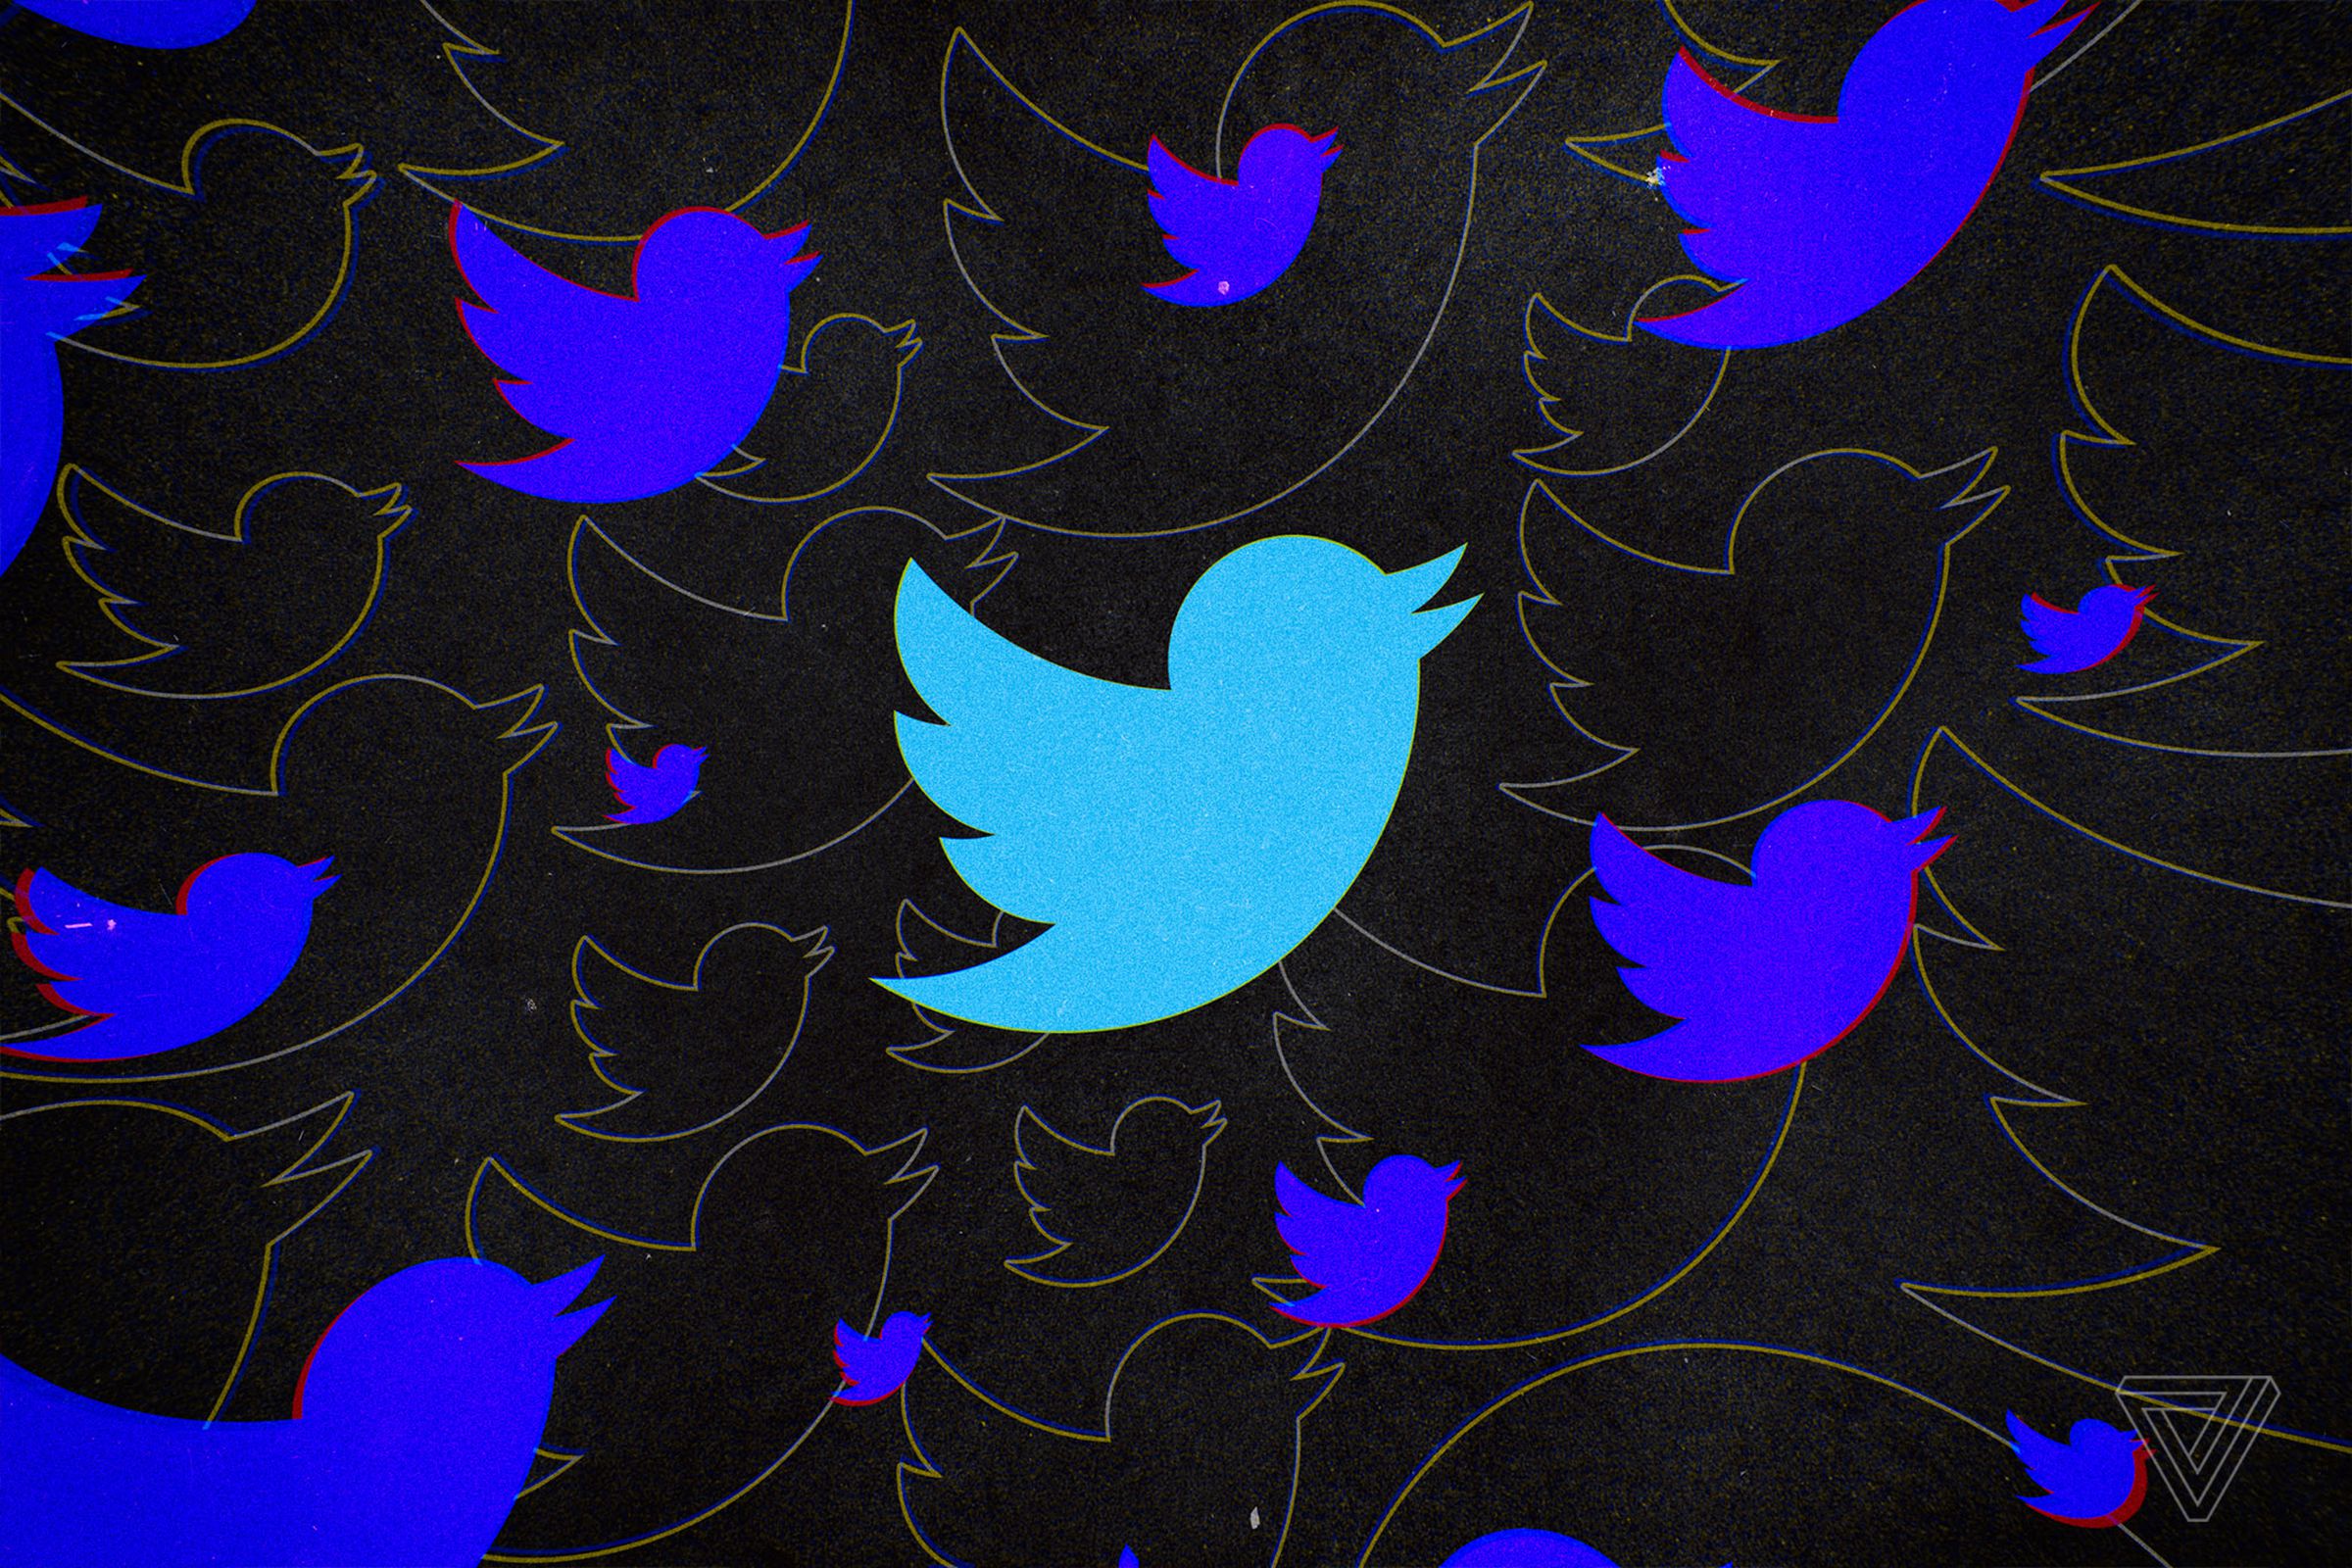 Twitter has settled a class action suit for $809.5 million